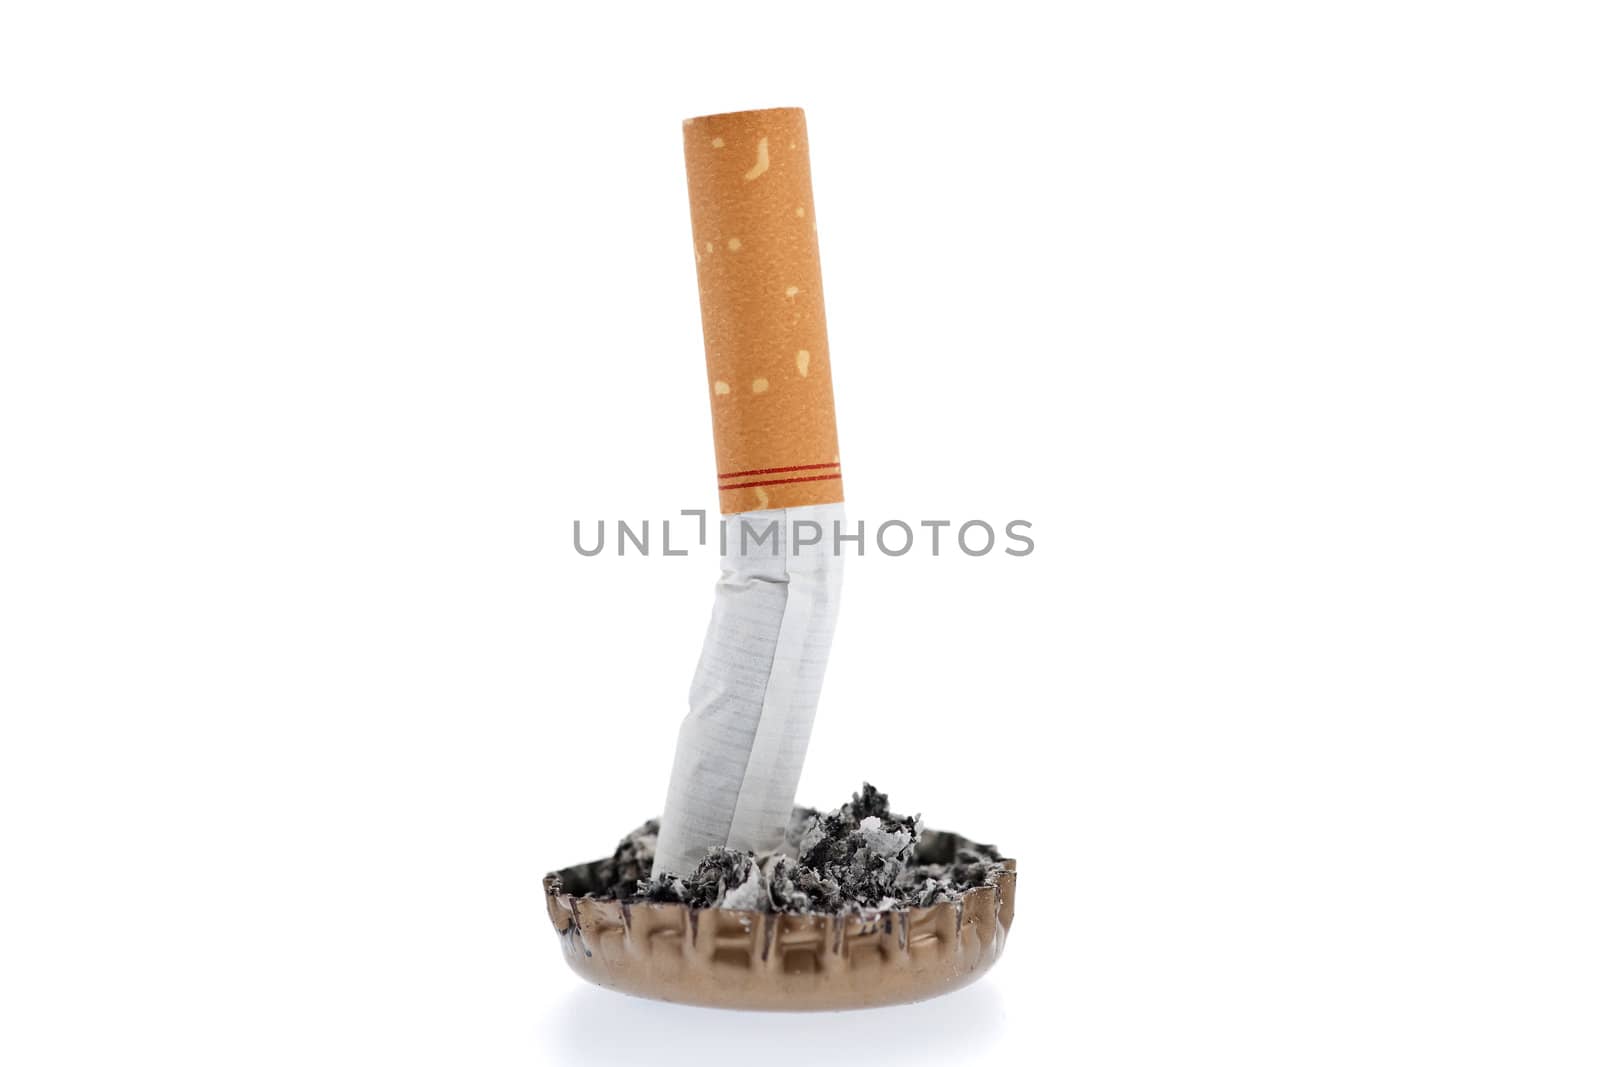 Quit smoking, cigarette butt in a bottle cap on white background